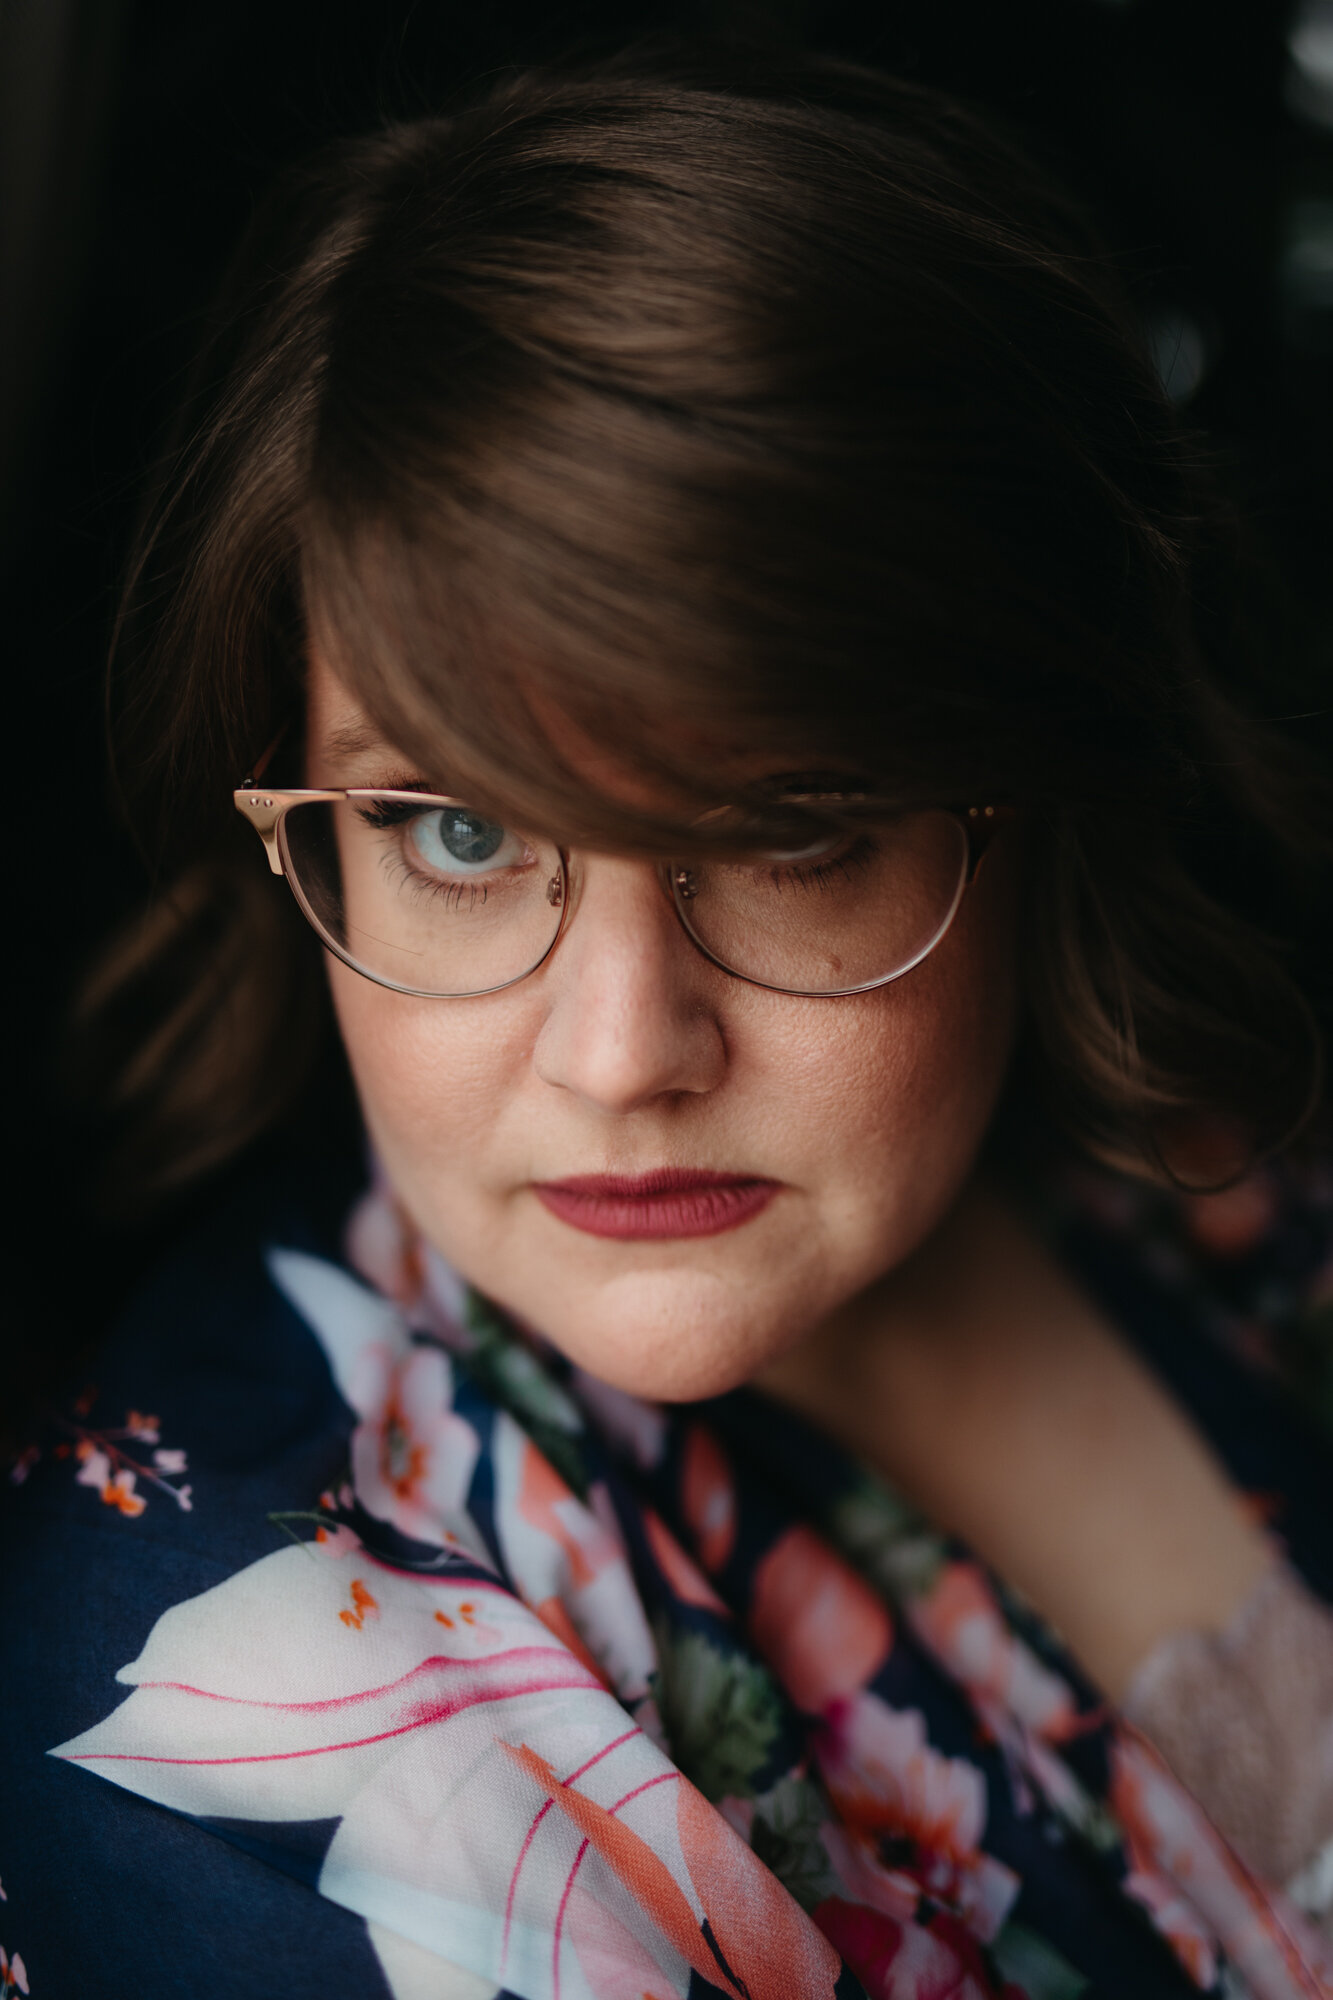 Asexual boudoir portrait of person with glasses